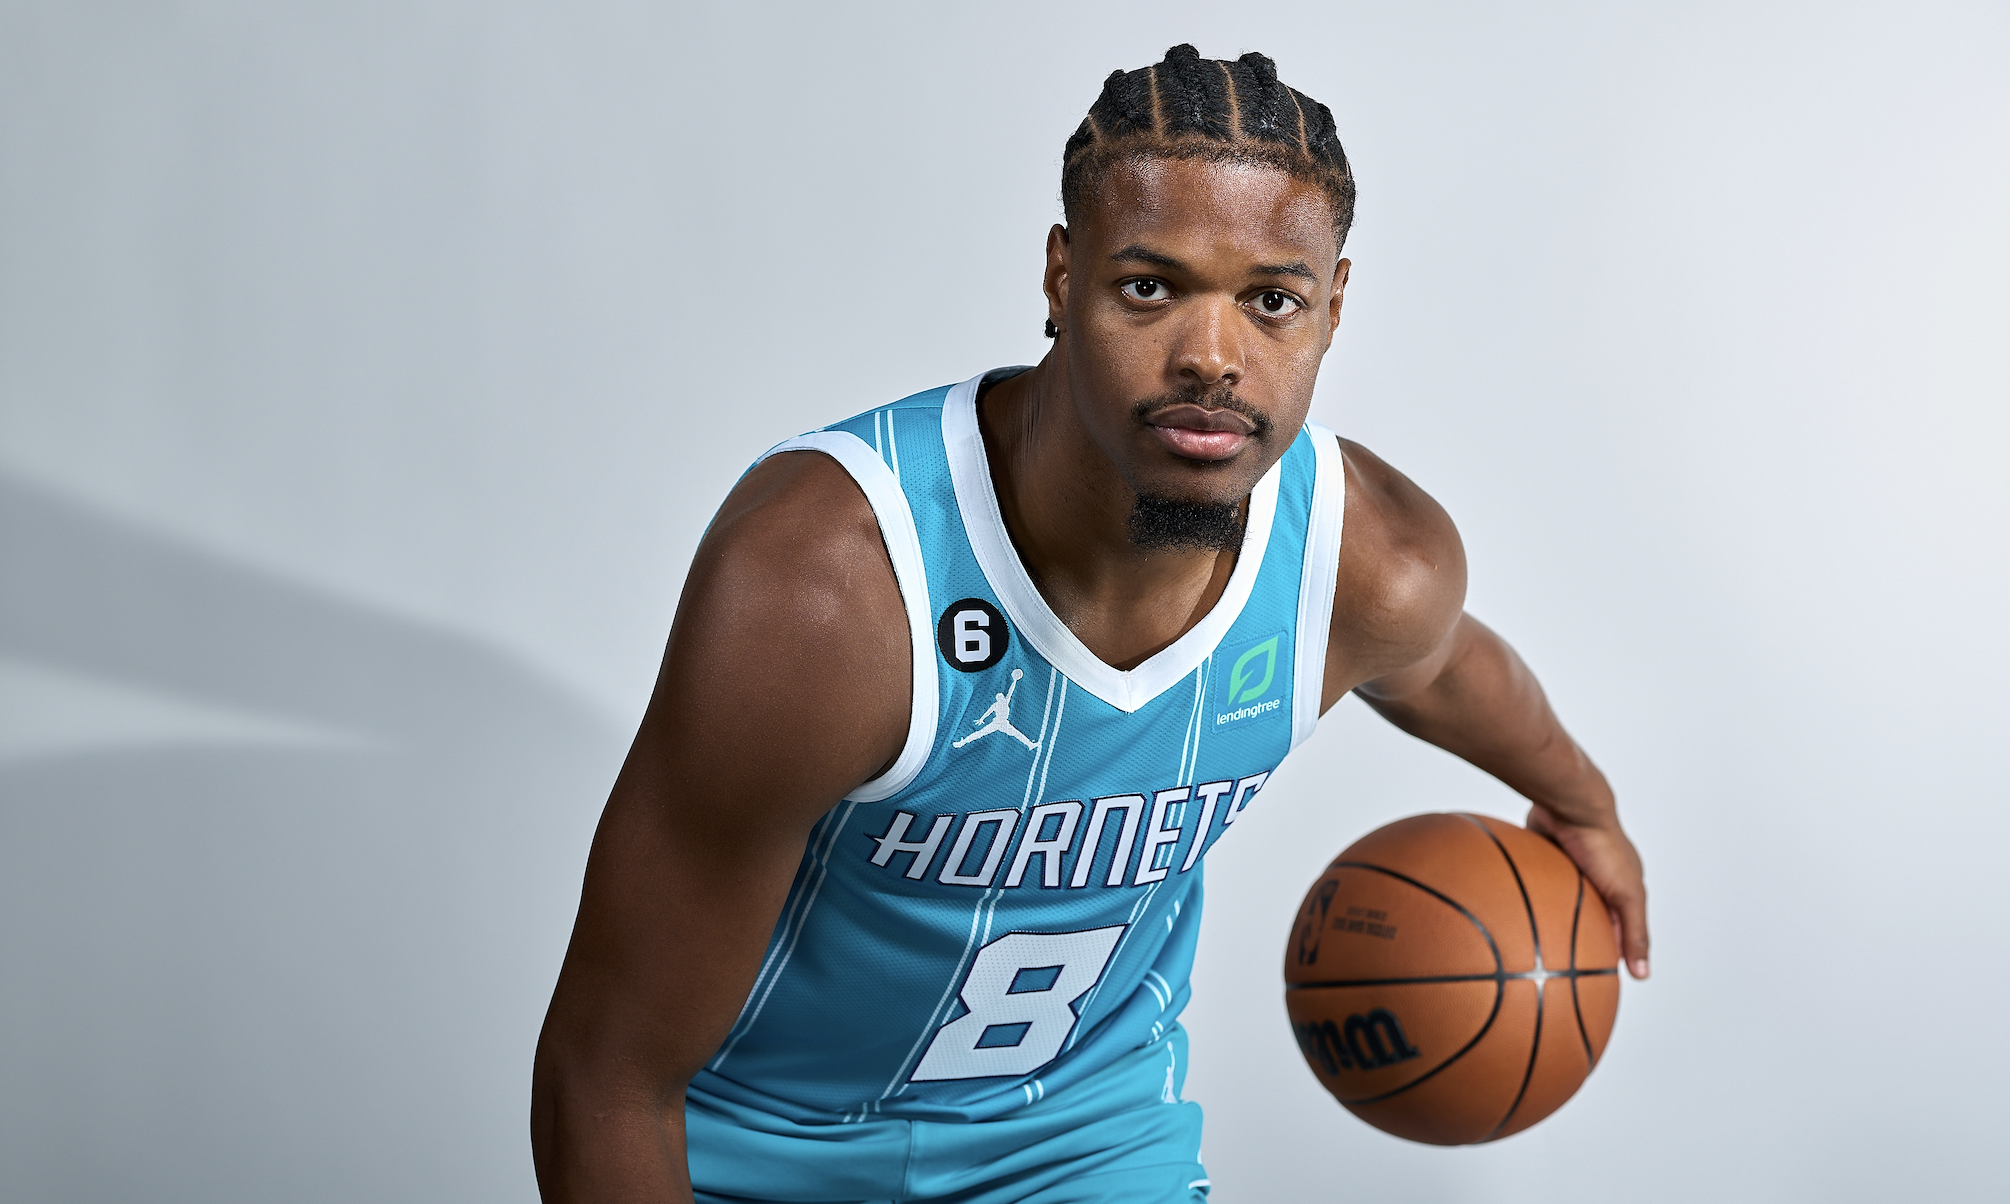 Hornets lose guard Dennis Smith Jr. signs 1-year deal with Nets